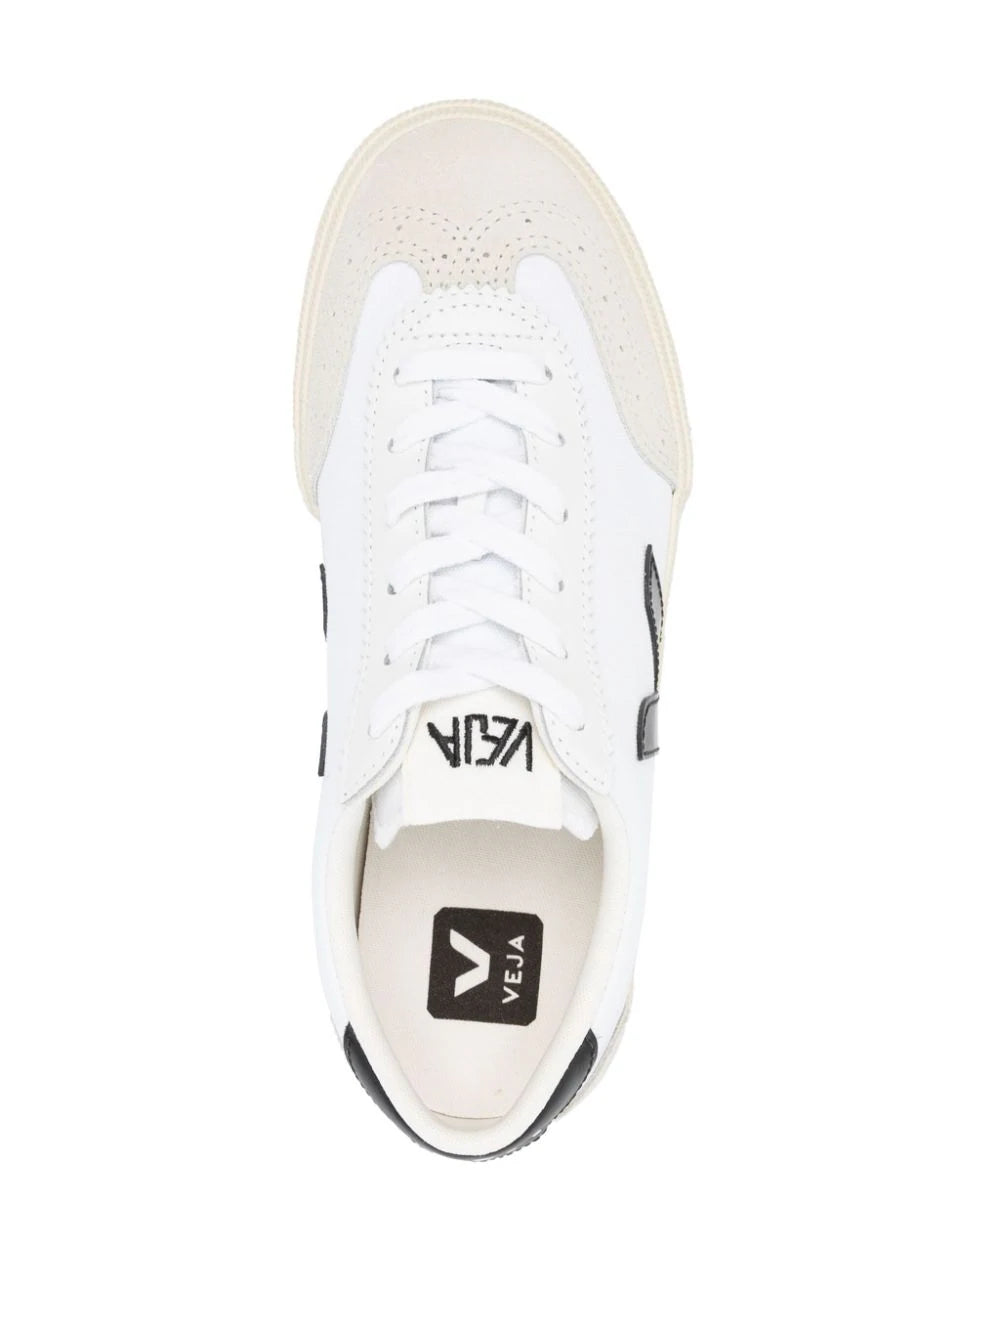 Volley Canvas Sneakers in White_Black